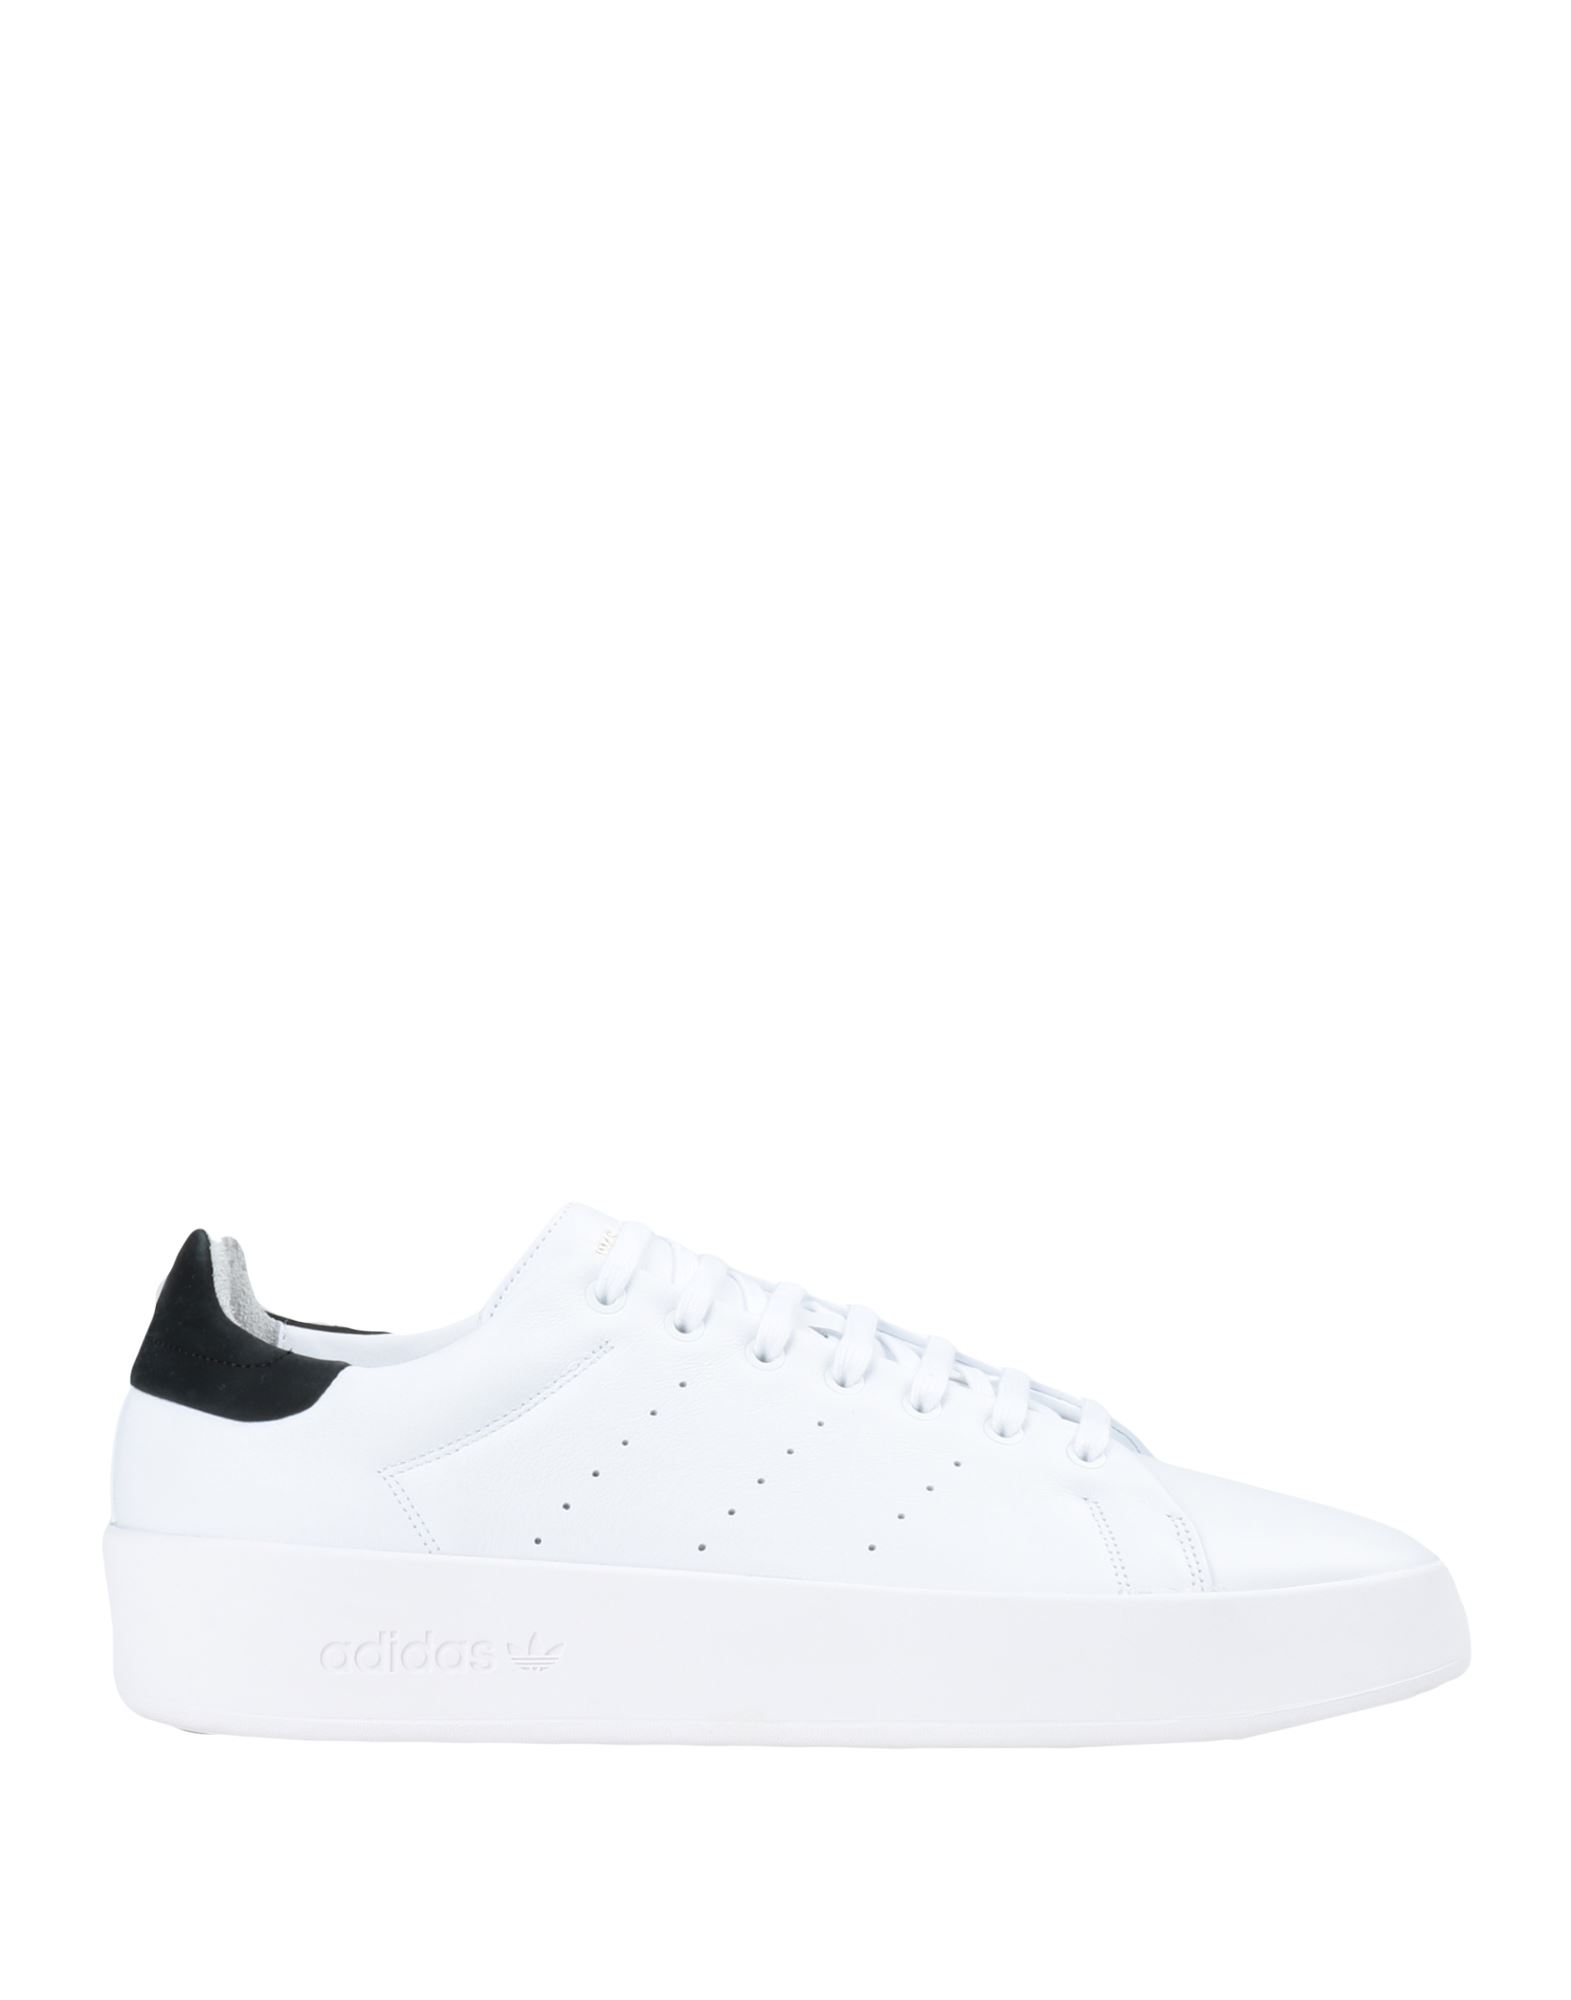 ADIDAS ORIGINALS ADIDAS ORIGINALS STAN SMITH RECON SHOES MAN SNEAKERS WHITE SIZE 8 SOFT LEATHER